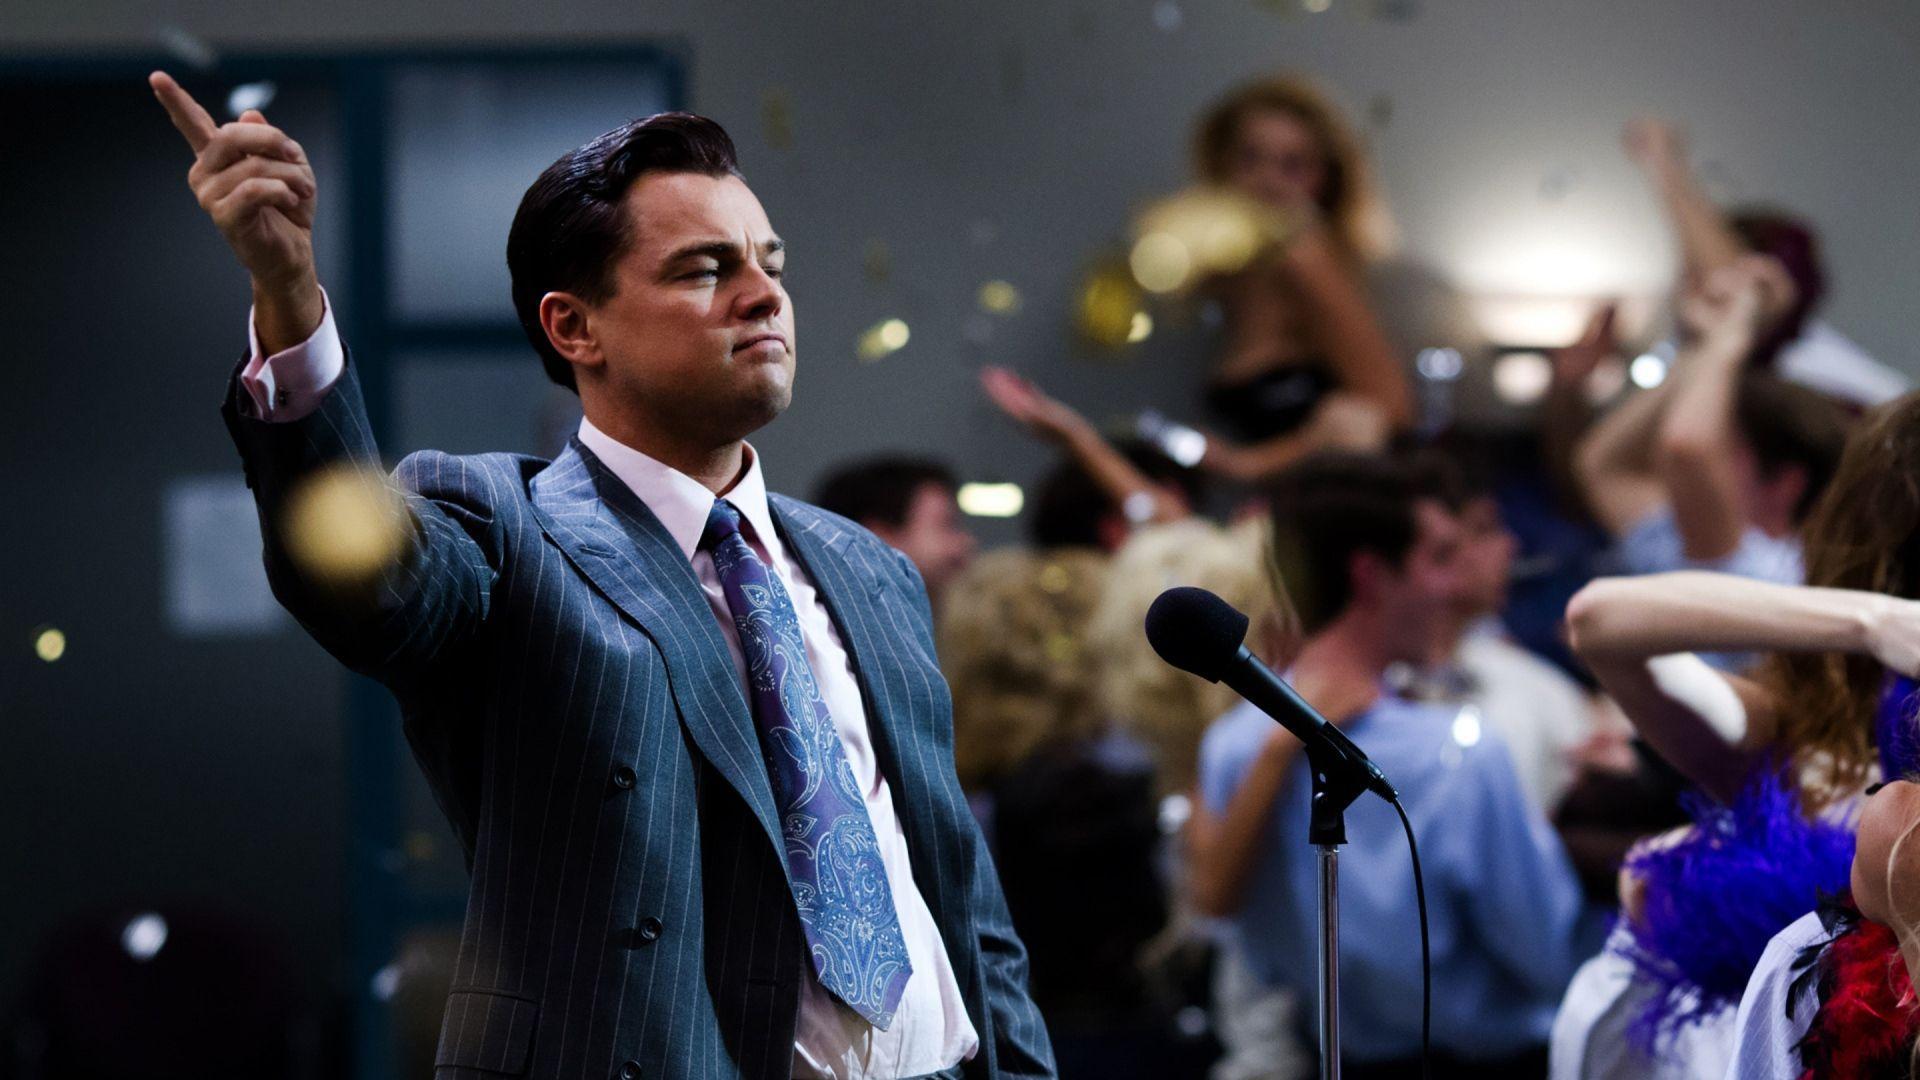 Download Wallpapers 1920x1080 The wolf of wall street, Leonardo